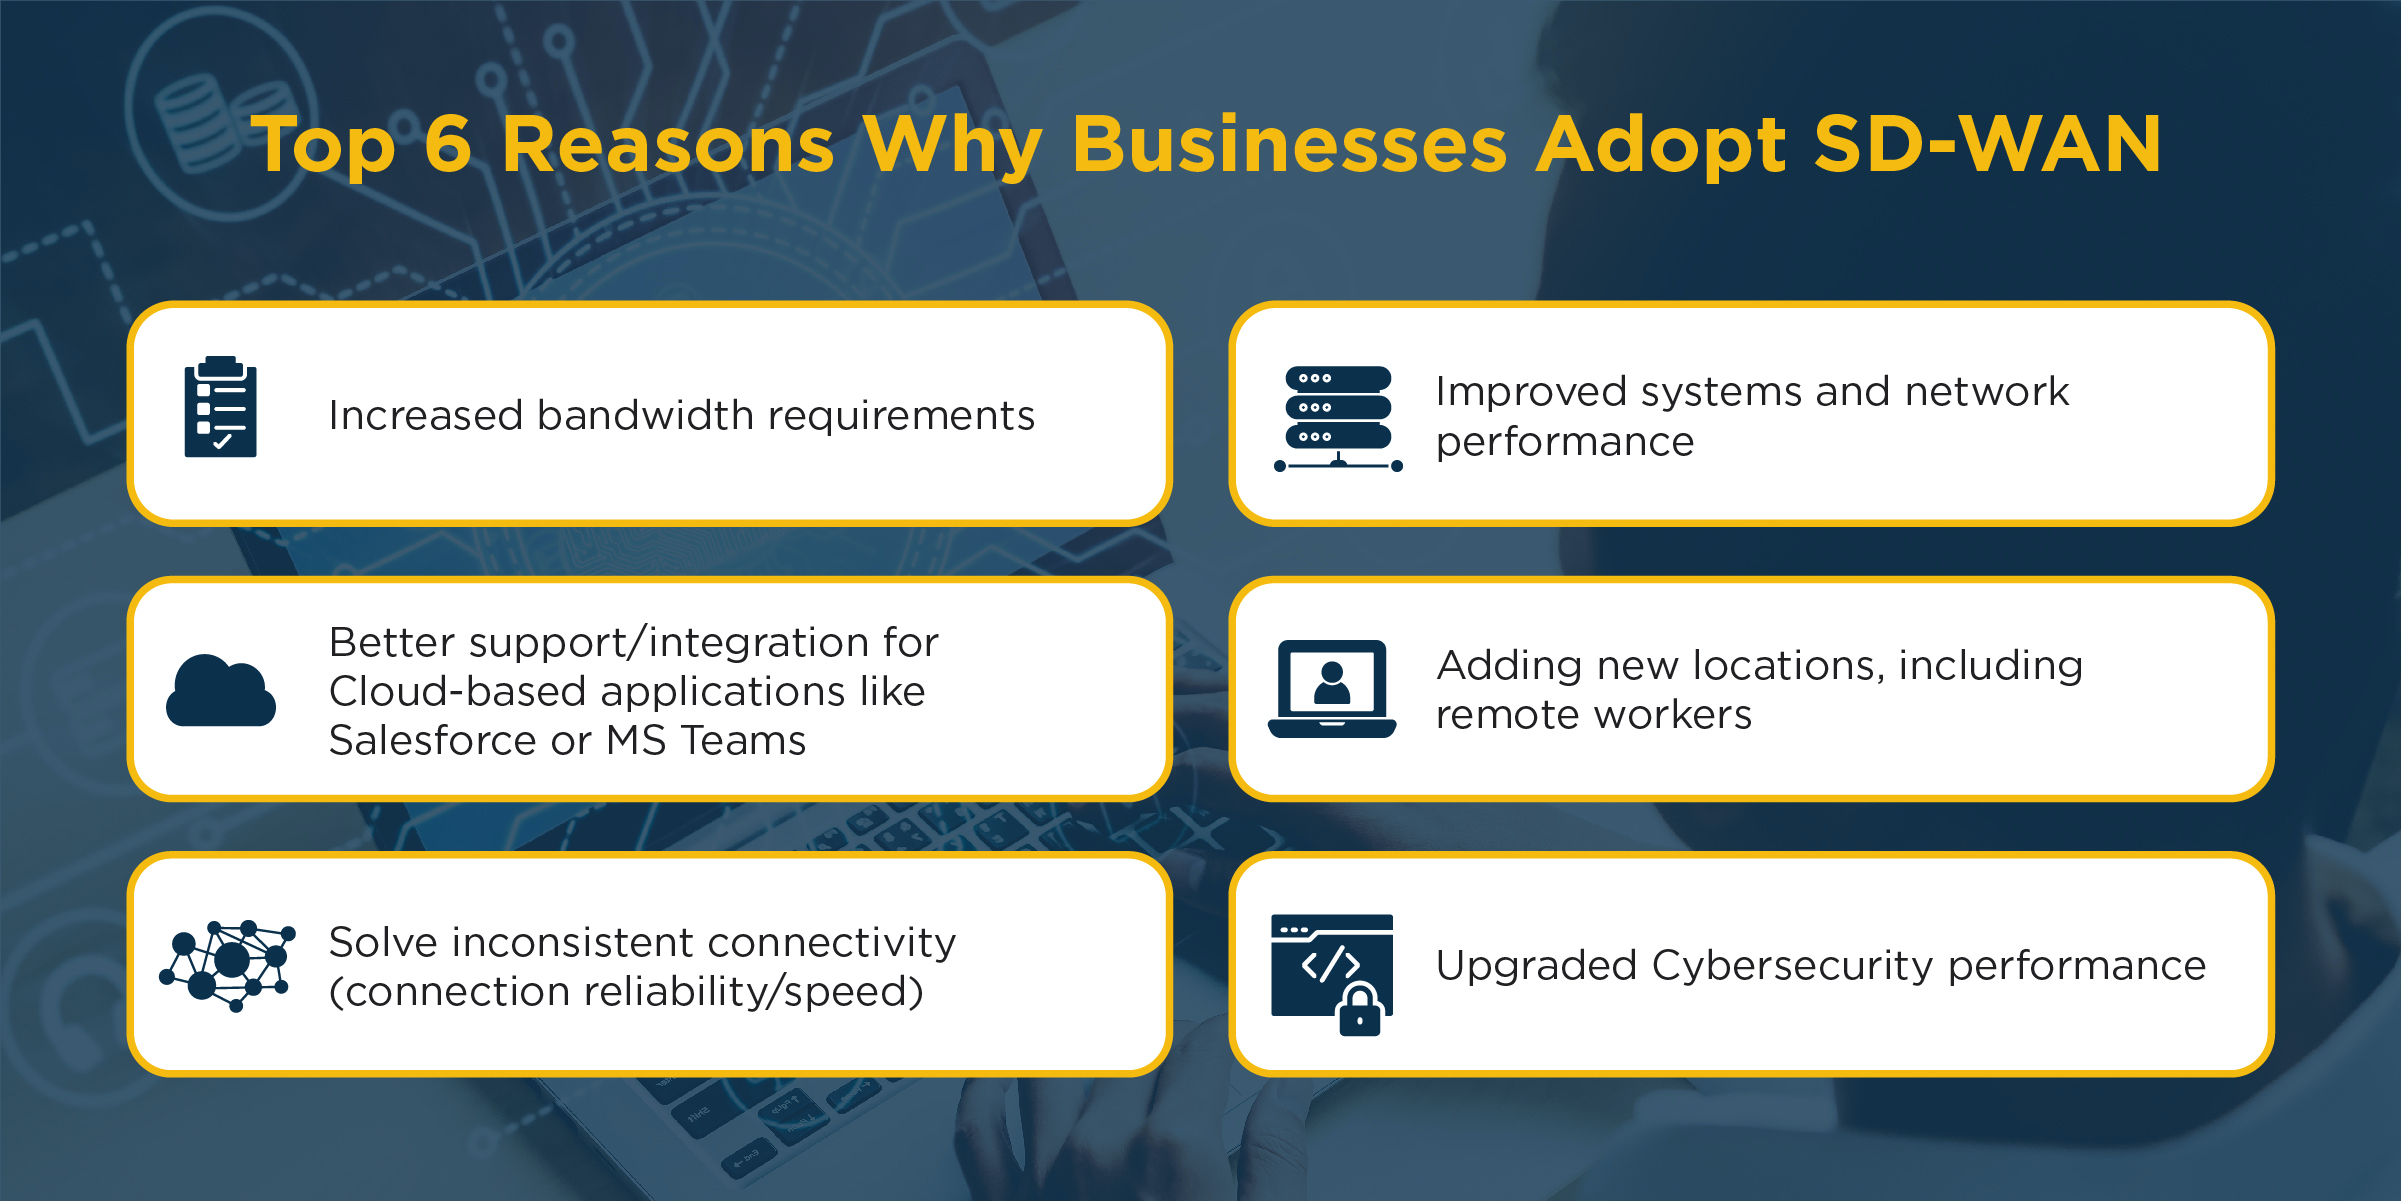 Top 6 Reasons Why Businesses Adopt SD-WAN